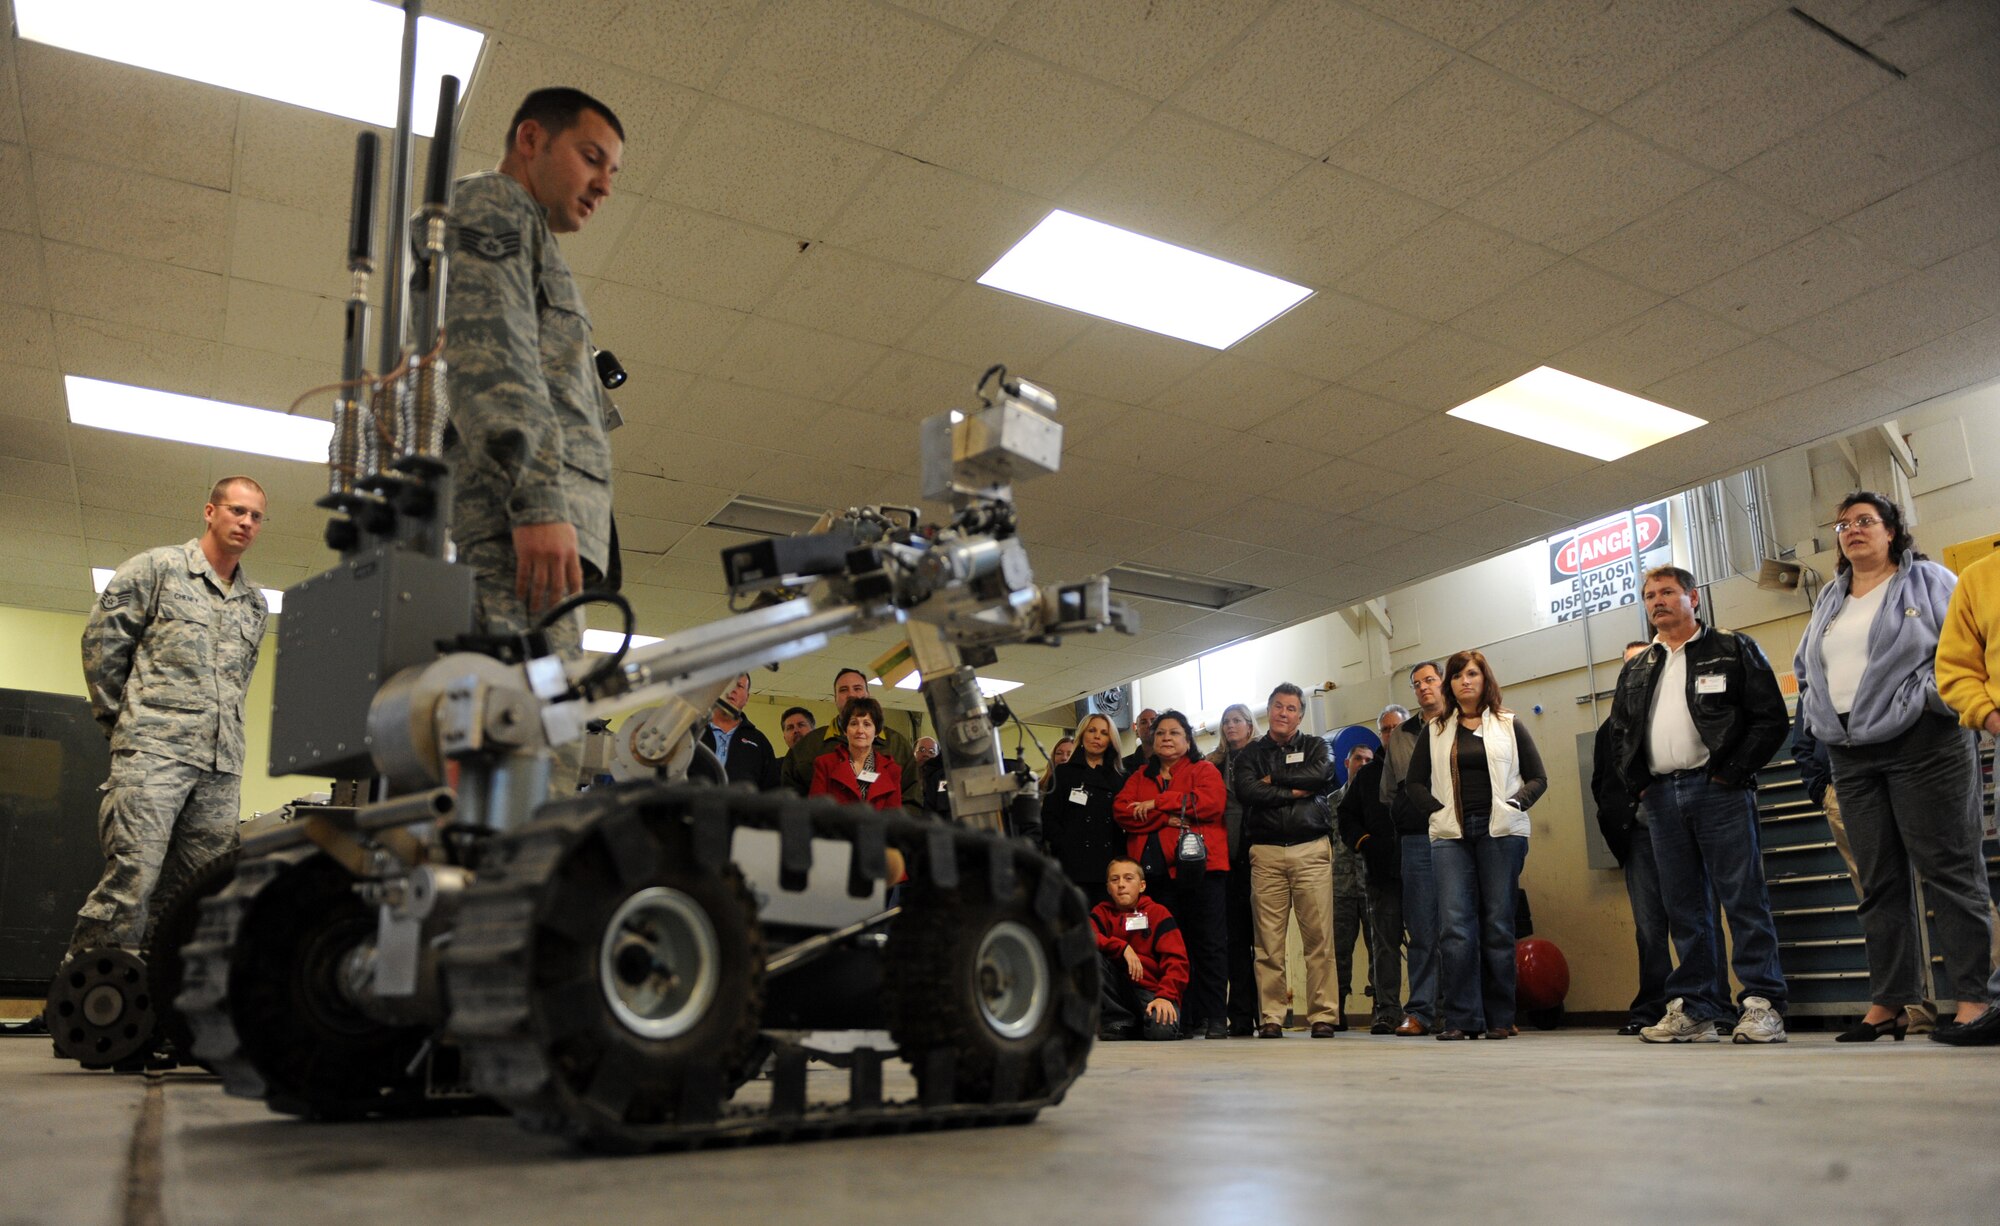 MOUNTAIN HOME AIR FORCE BASE, Idaho -- Staff Sgt. Taylor Saum, 366th Civil Engineer Squadron explosive ordnance apprentice, briefs members of the Honorary Commanders program about the HD-1 robot during the Honorary Commander Mission Support Group Orientation Tour Nov. 6. The honorary commanders program is a wing-level program that pairs civic leaders with squadron, group and wing leaders to enhance the relationships between local communities and the base. It also provides a rare glimpse of life on a military installation to members of neighboring communities -- many of whom have no connection to the Air Force or prior knowledge of the military. (U.S. Air Force photo by Airman 1st Class Debbie Lockhart)